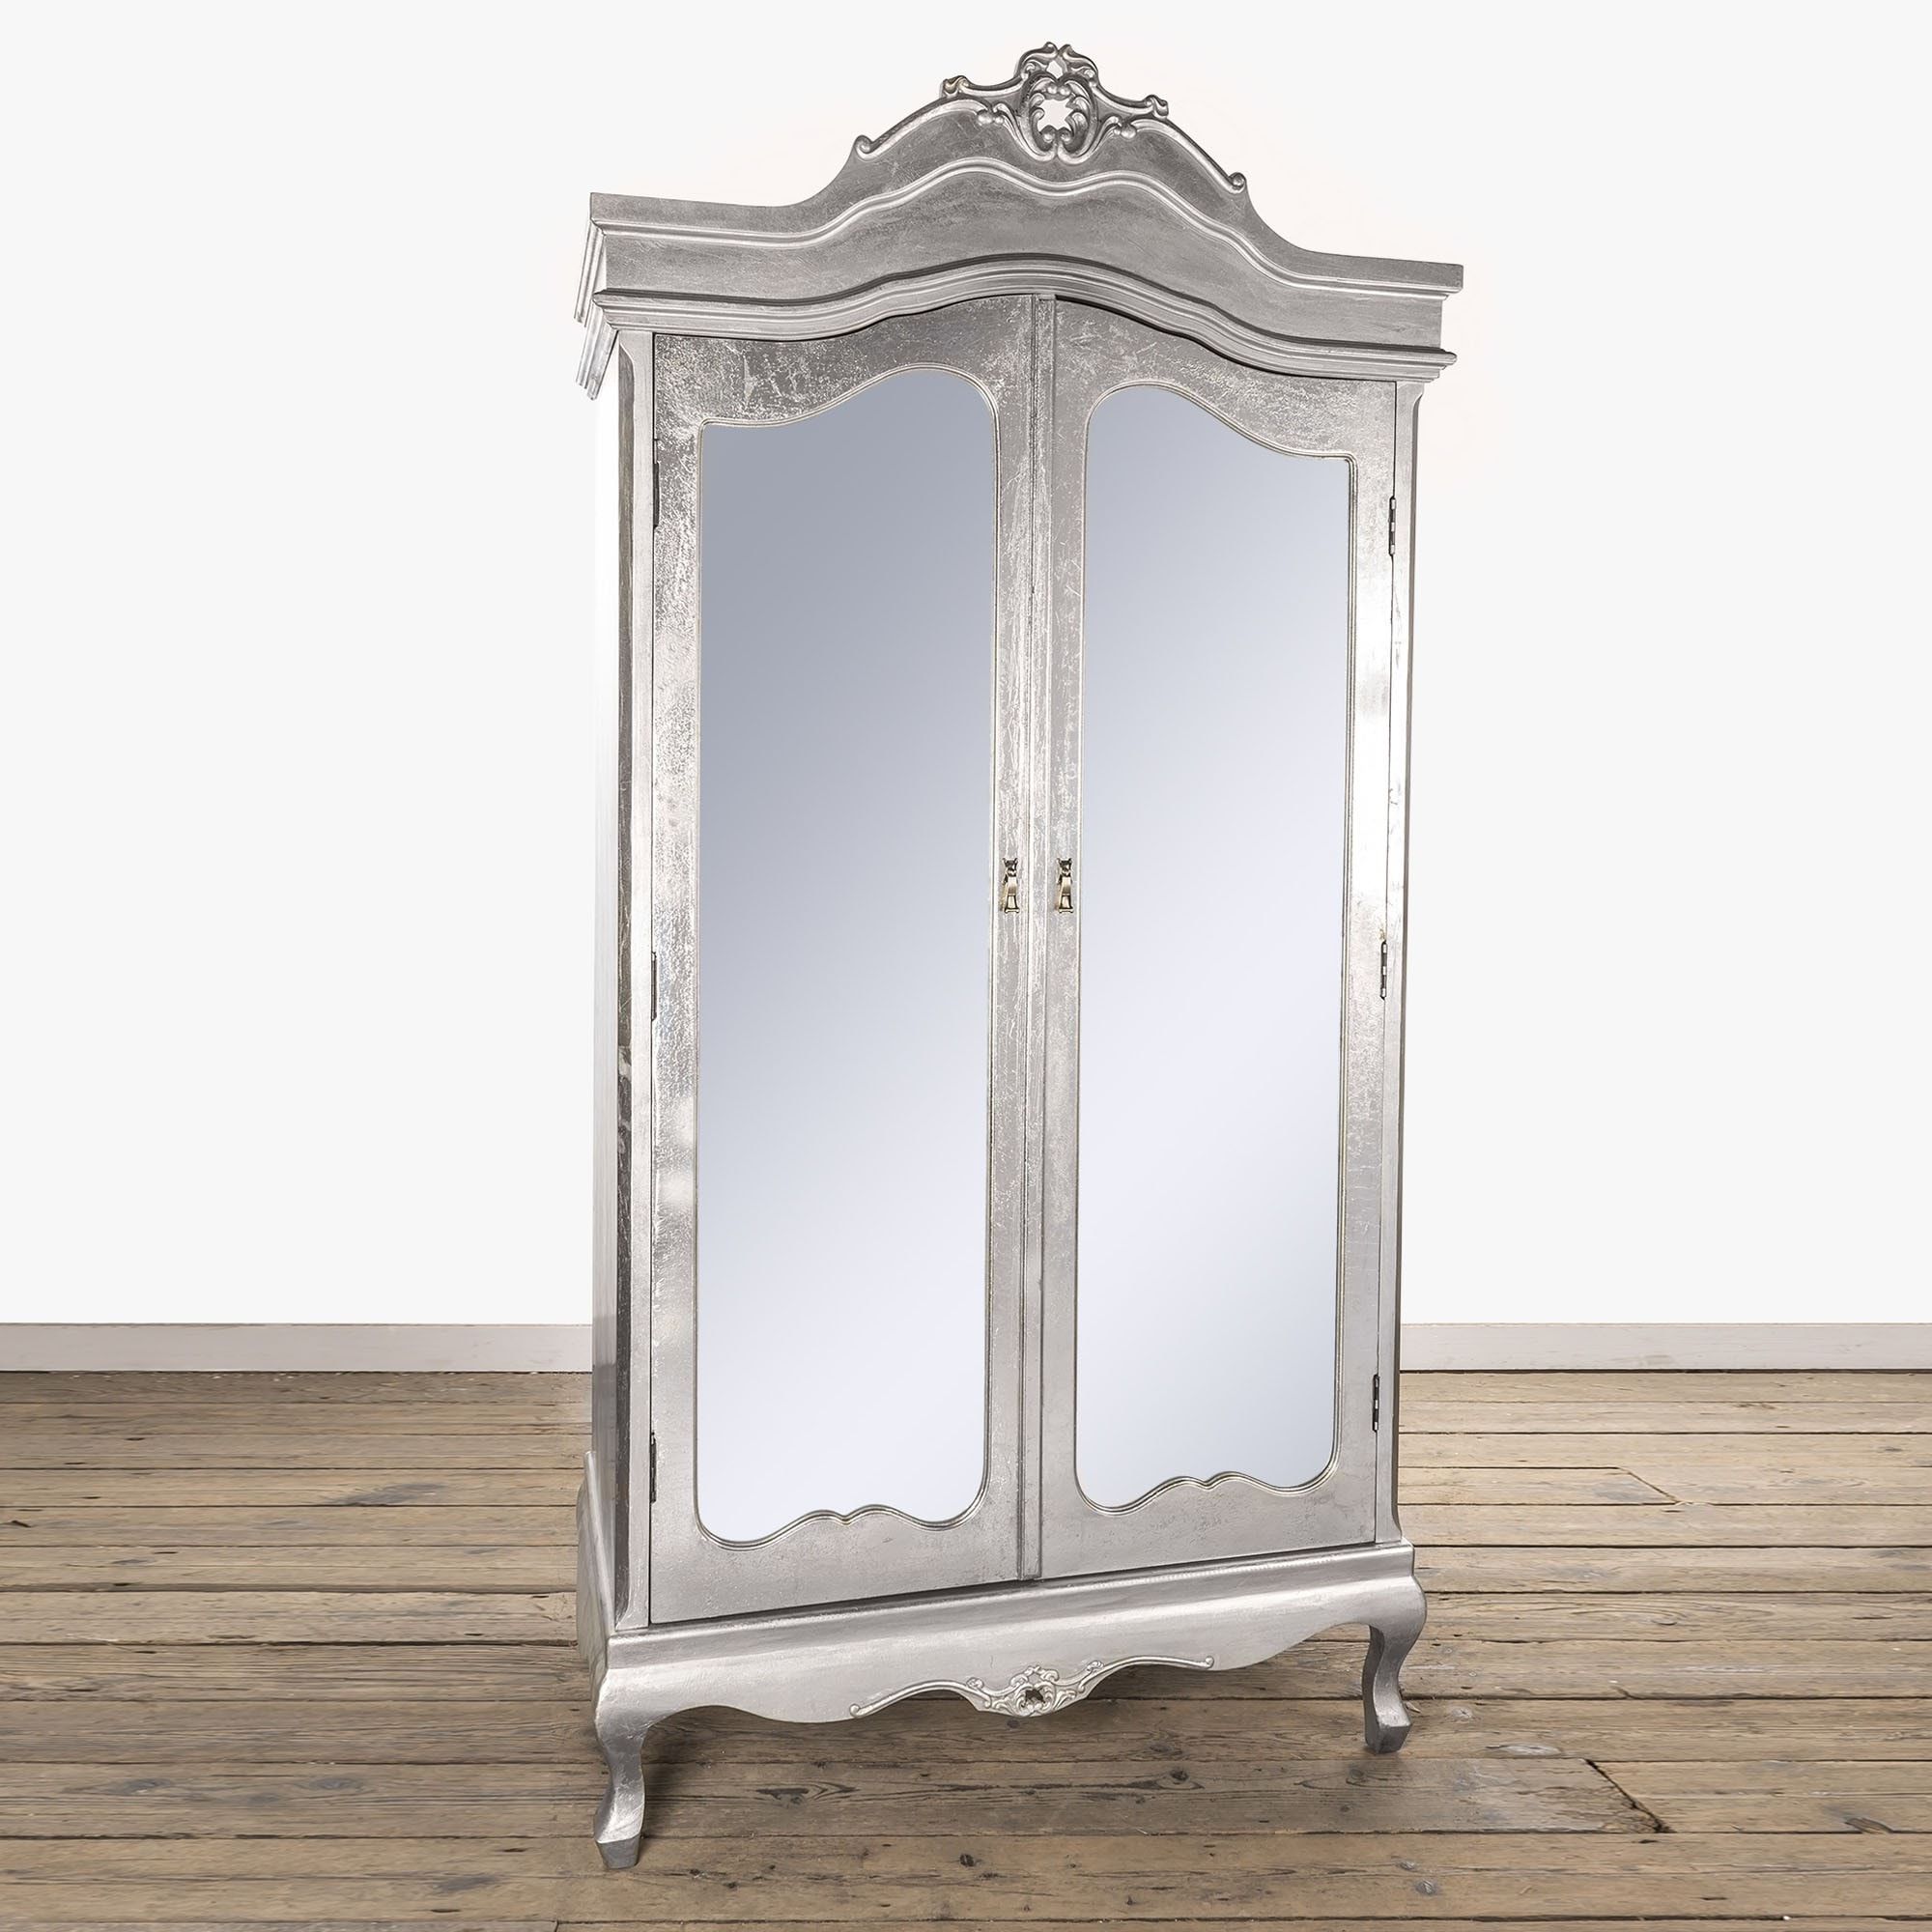 Antique French Styled Silver Annabelle Mirrored Wardrobe | Mirrored Wardrobe Intended For Silver Wardrobes (View 8 of 20)